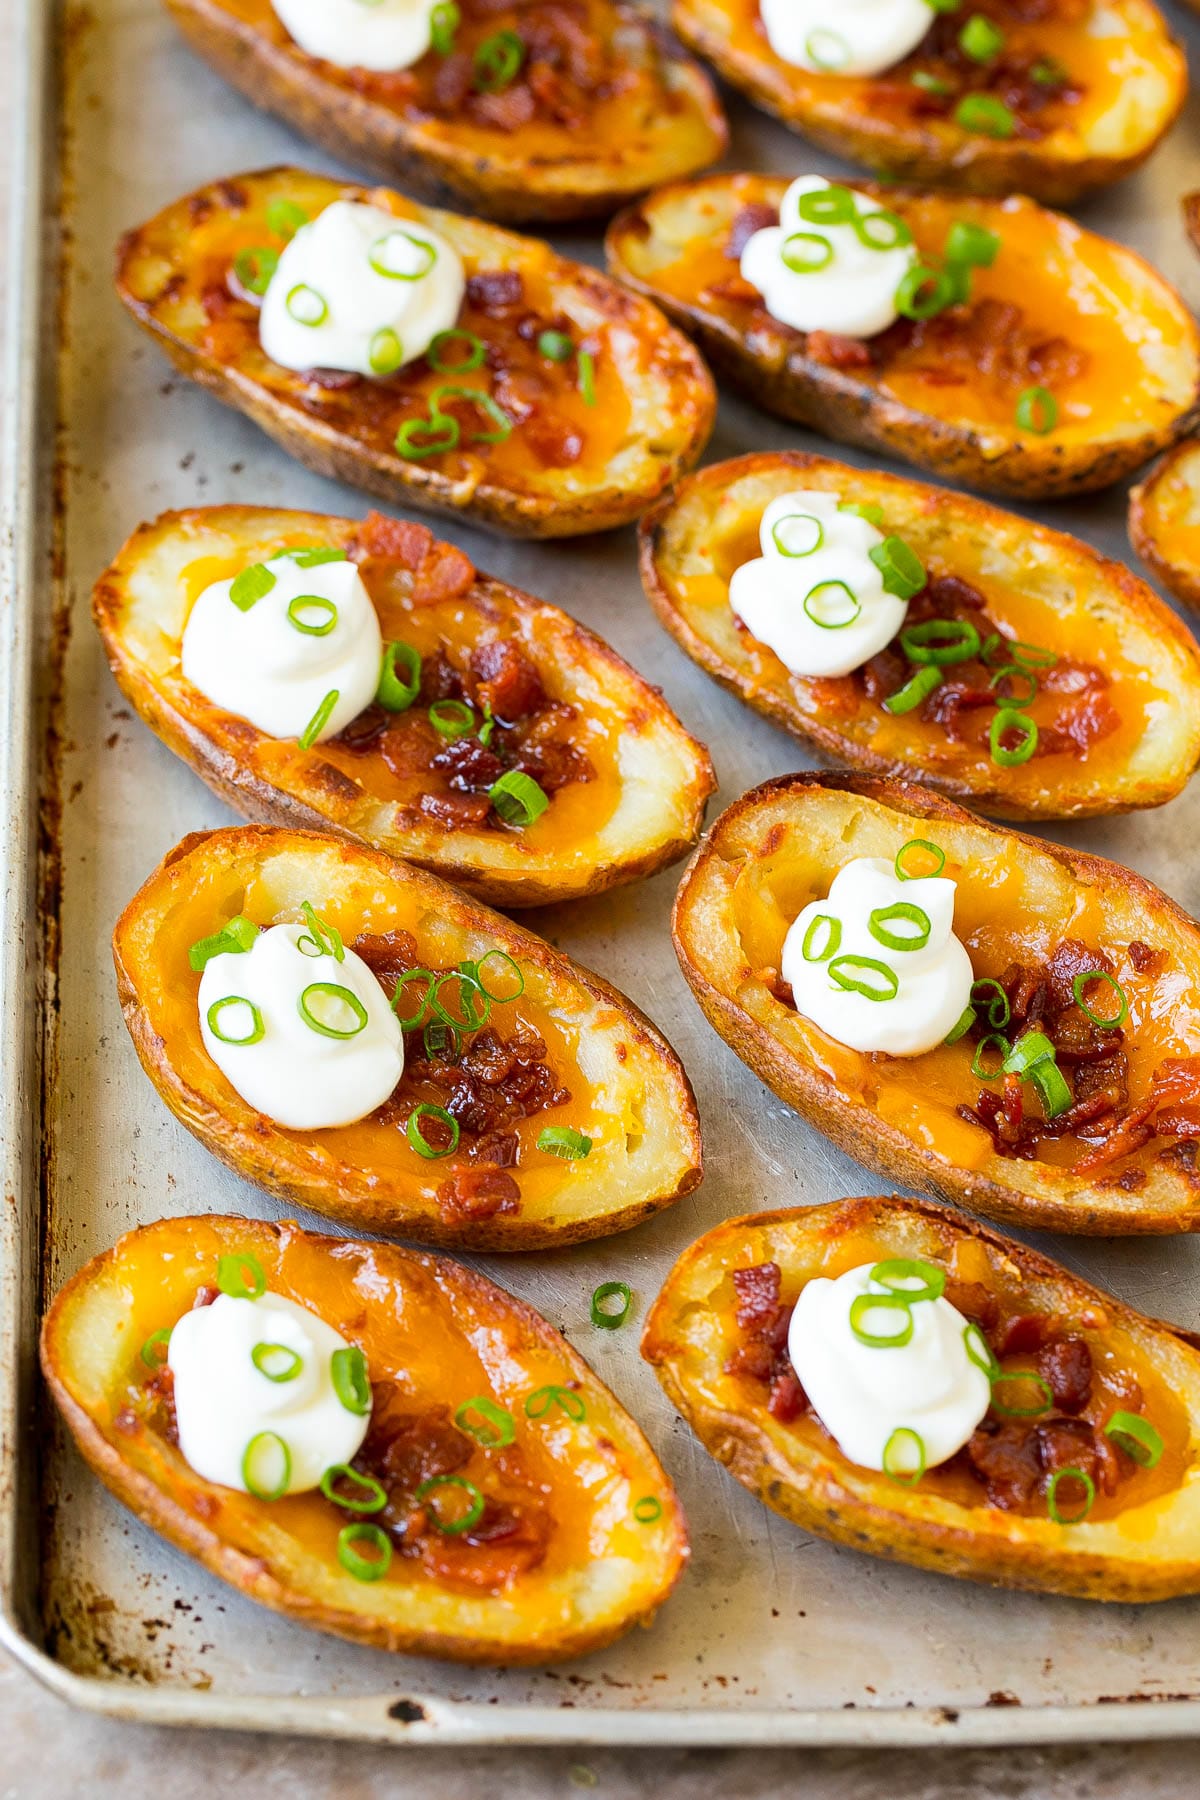 A sheet pan filled with potato skins that are topped with sour cream and green onions.